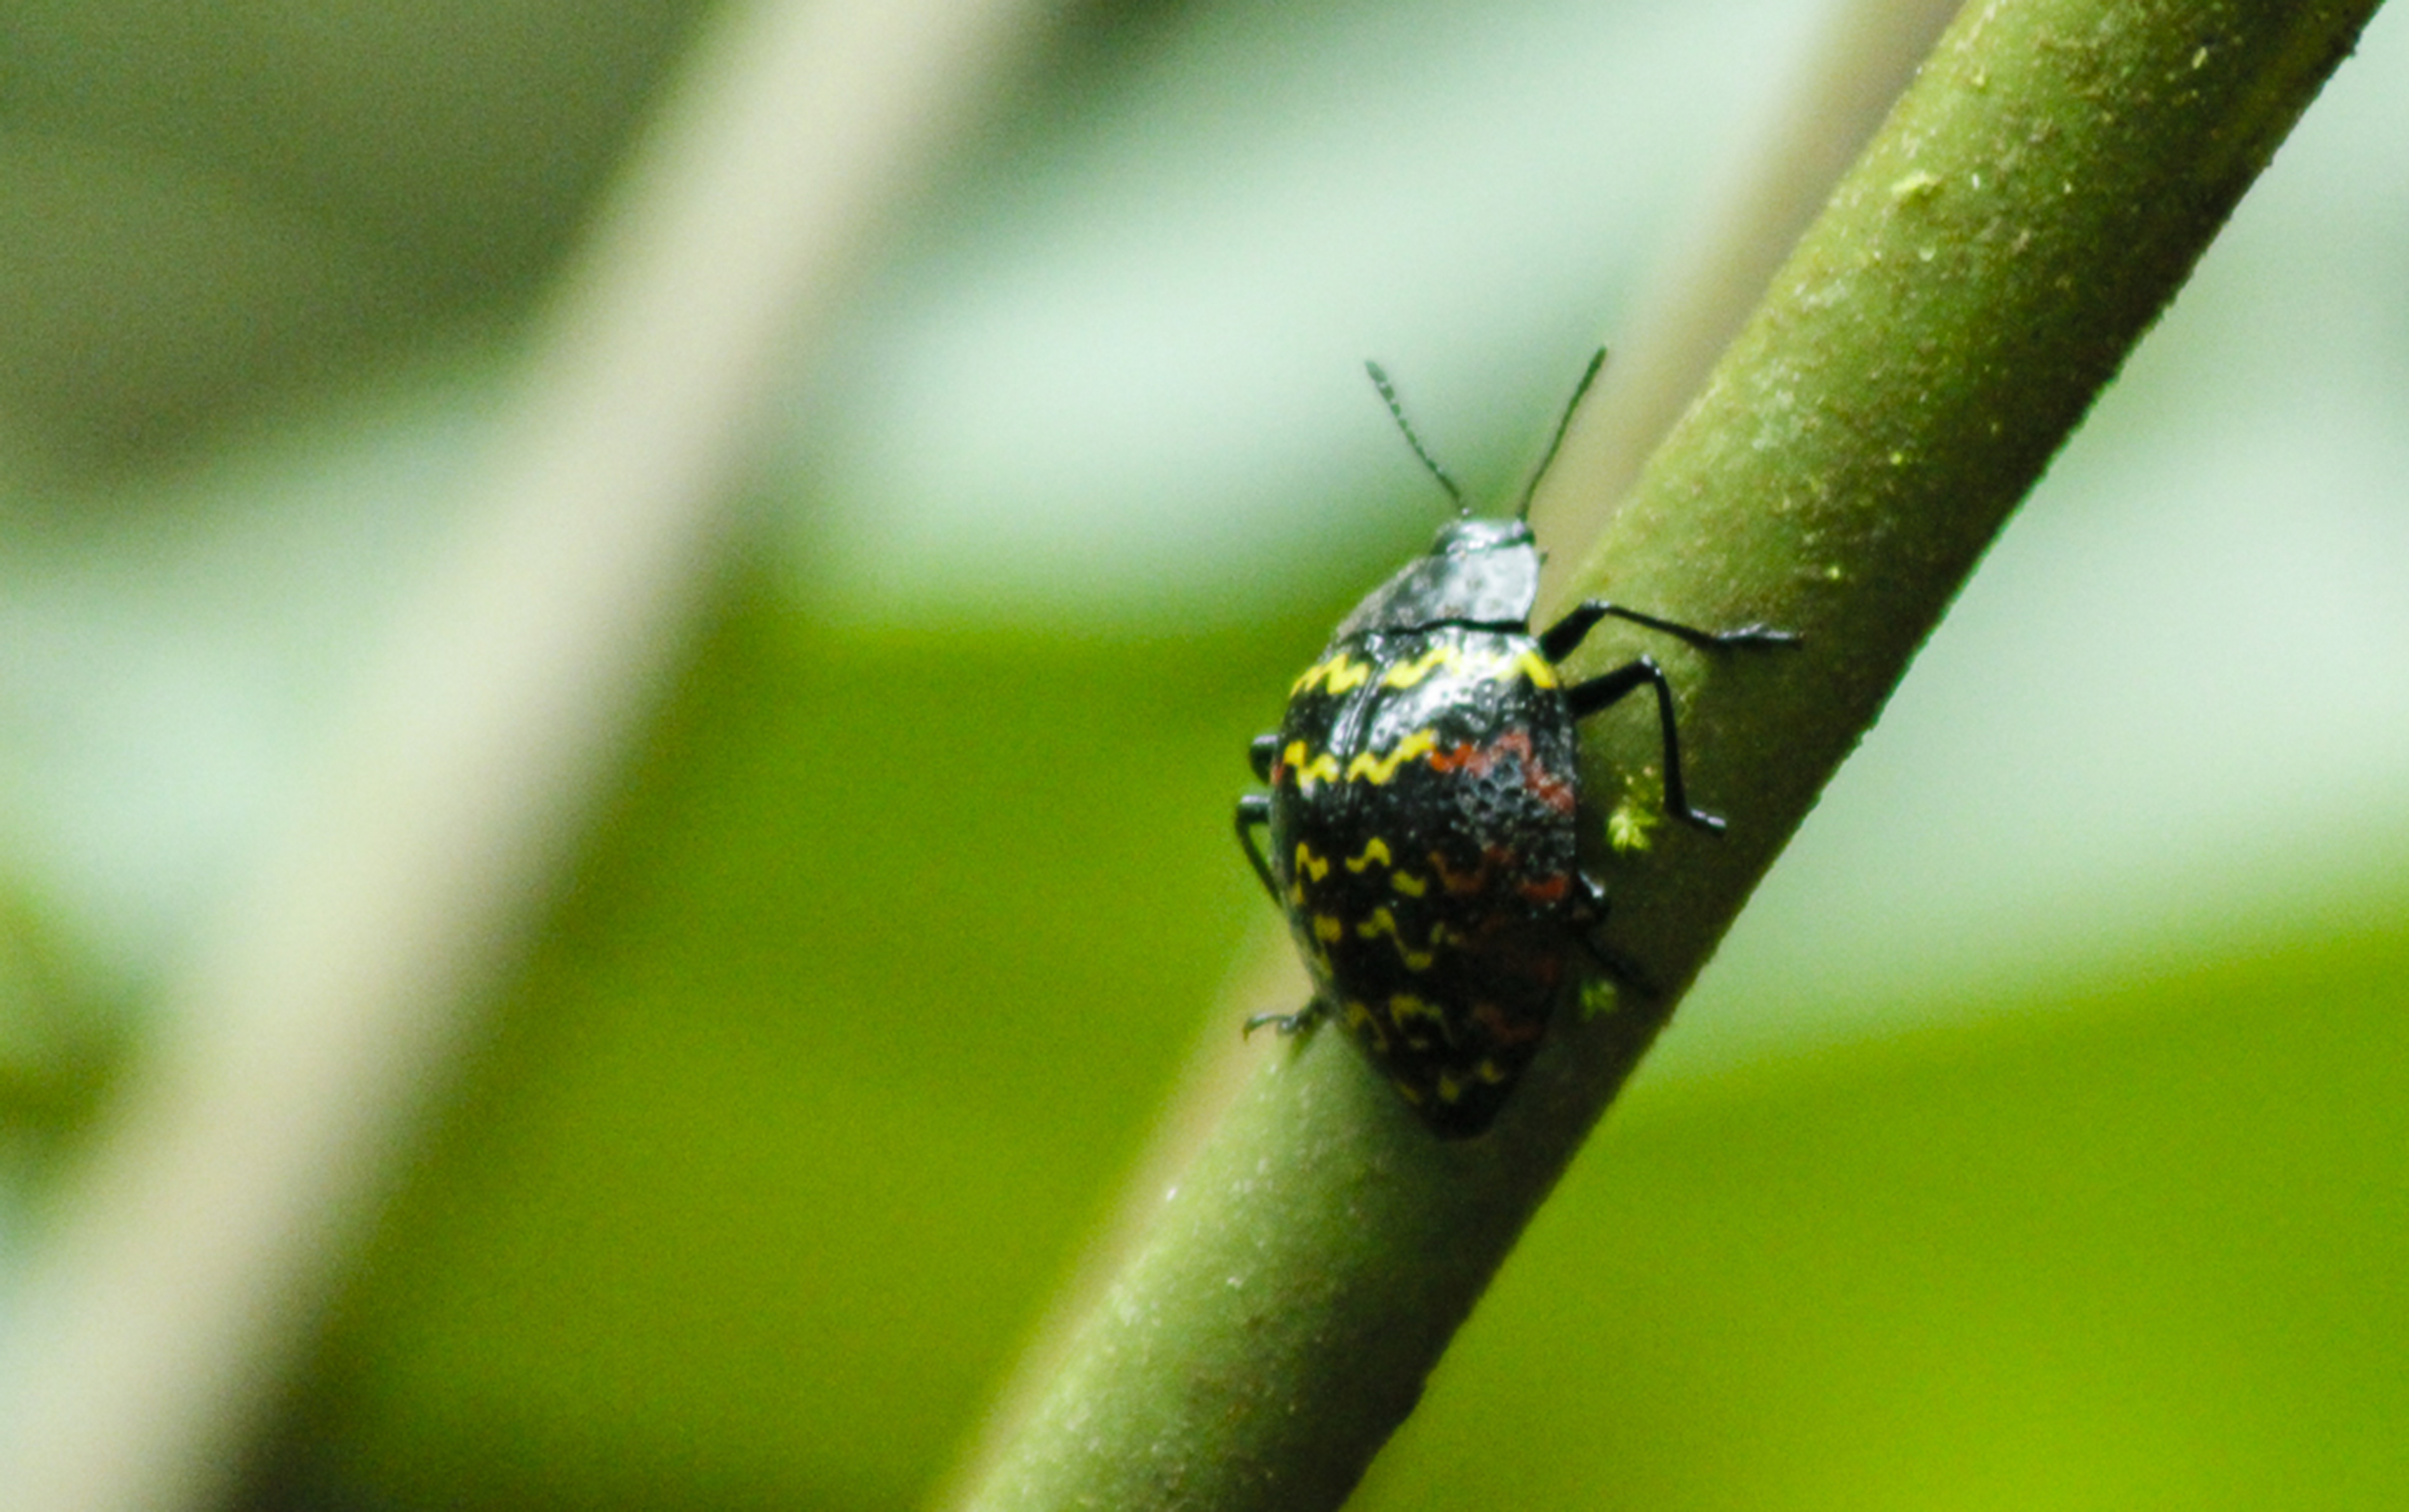 A zigzag beetle adds a tiny splash of colour to a plant stem